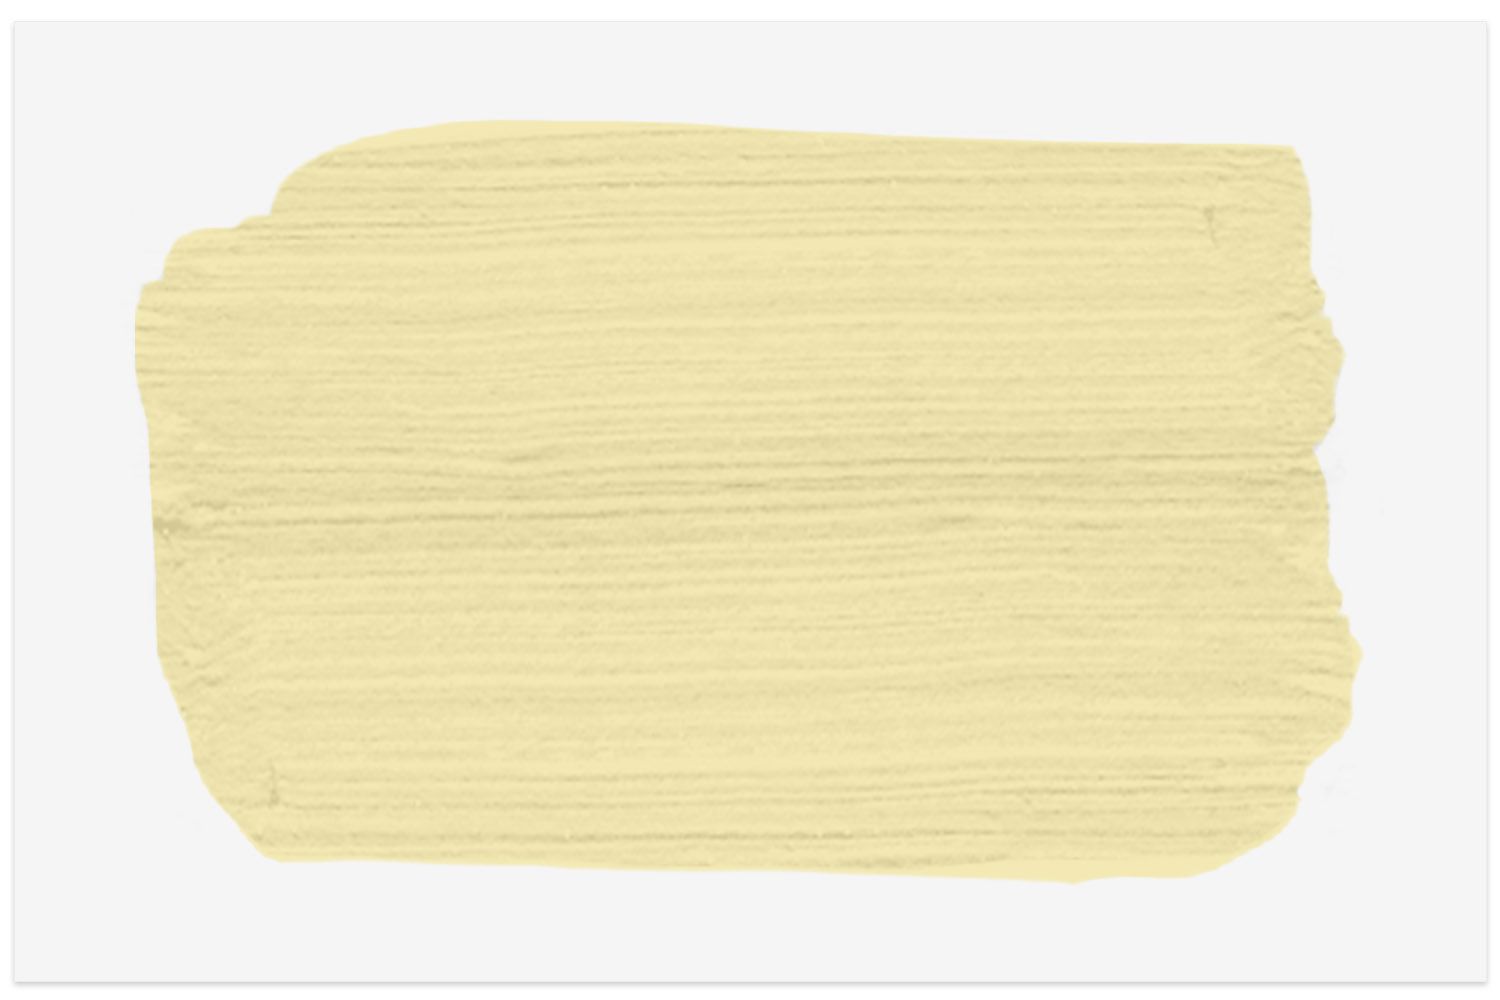 Stucco Cream with Tile Roof paint swatch